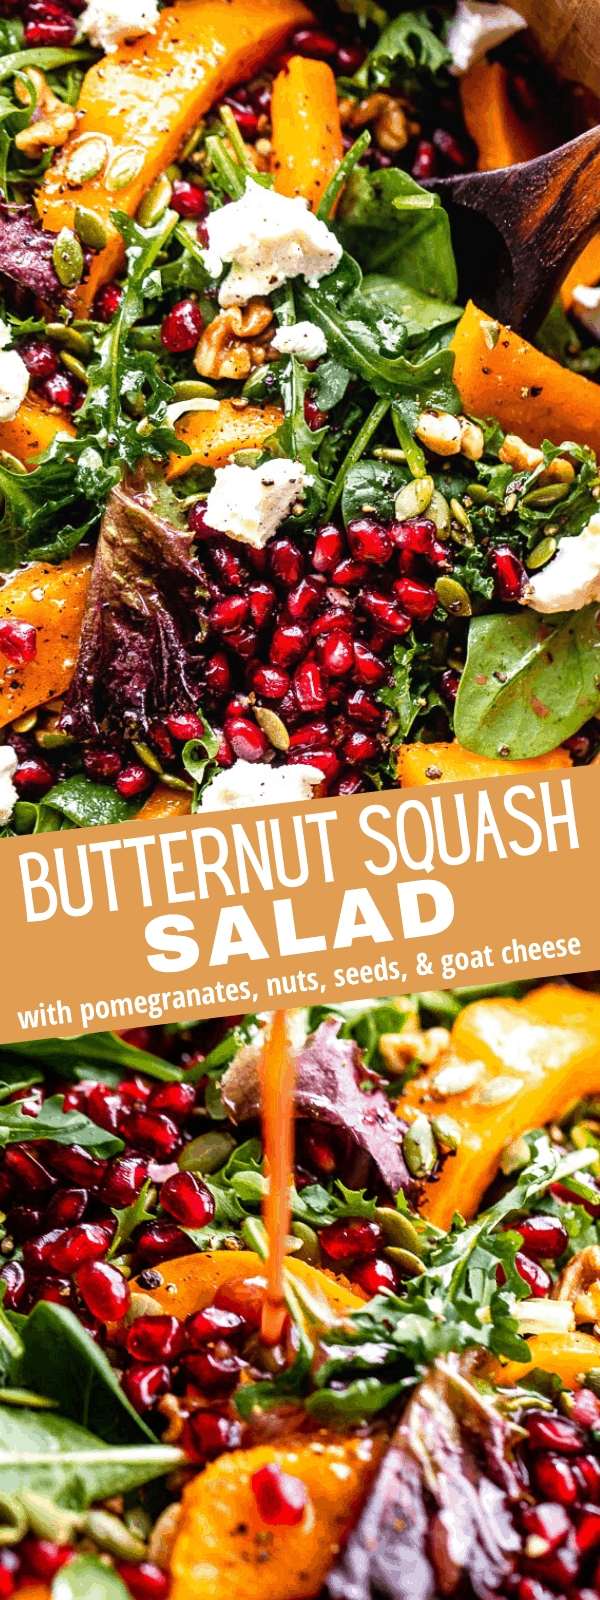 Easy Butternut Squash Salad | Healthy Salad with Pomegranate Dressing